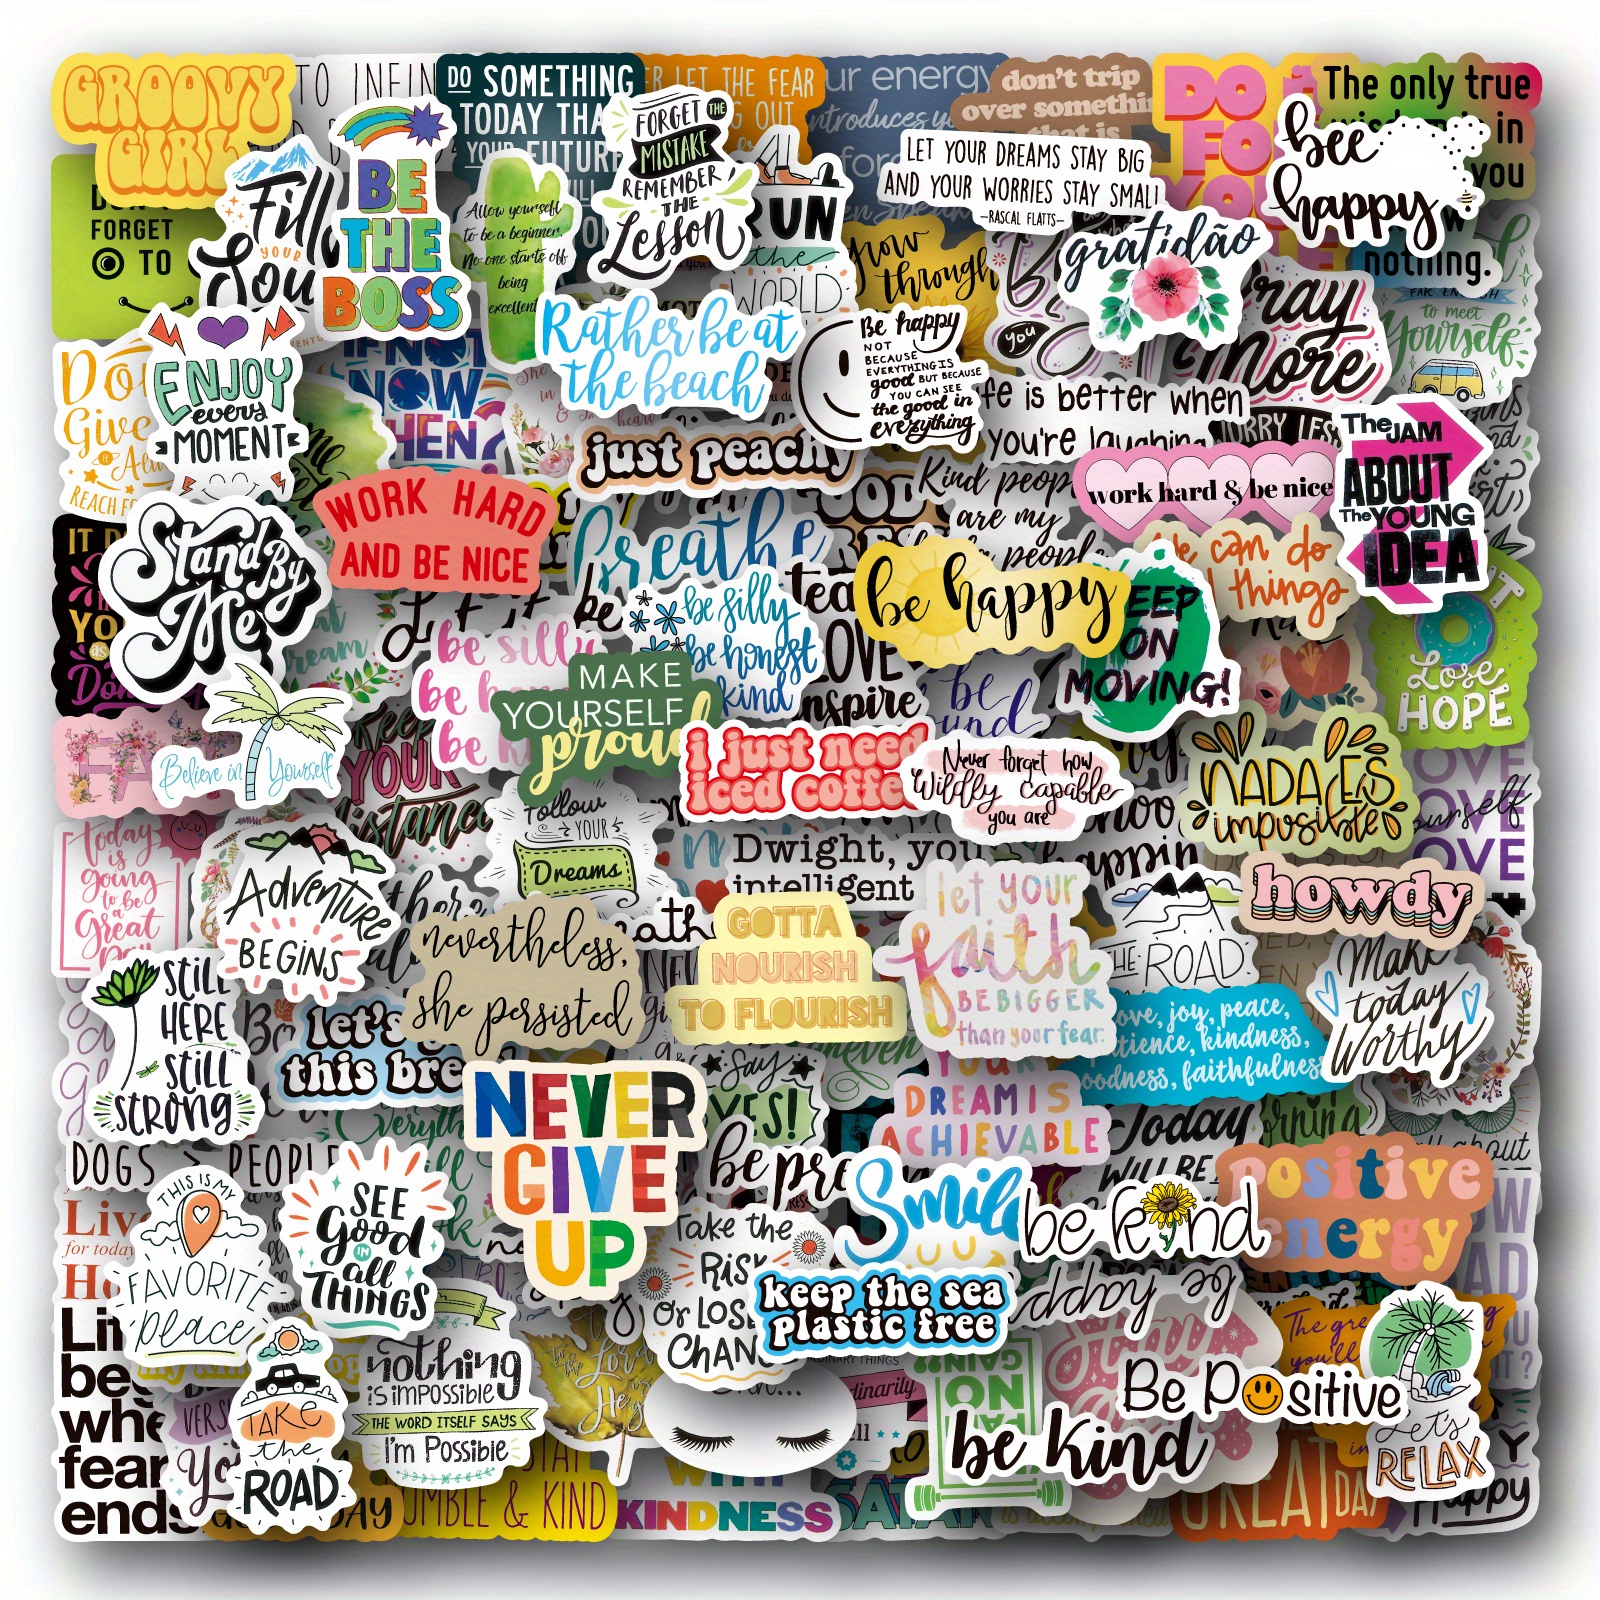 Planner Stickers 54pcs Stickers – Inspirational & Motivational, Cute & Aesthetic Stickers for Adults - Aesthetic Accessories & Sticker Pack for